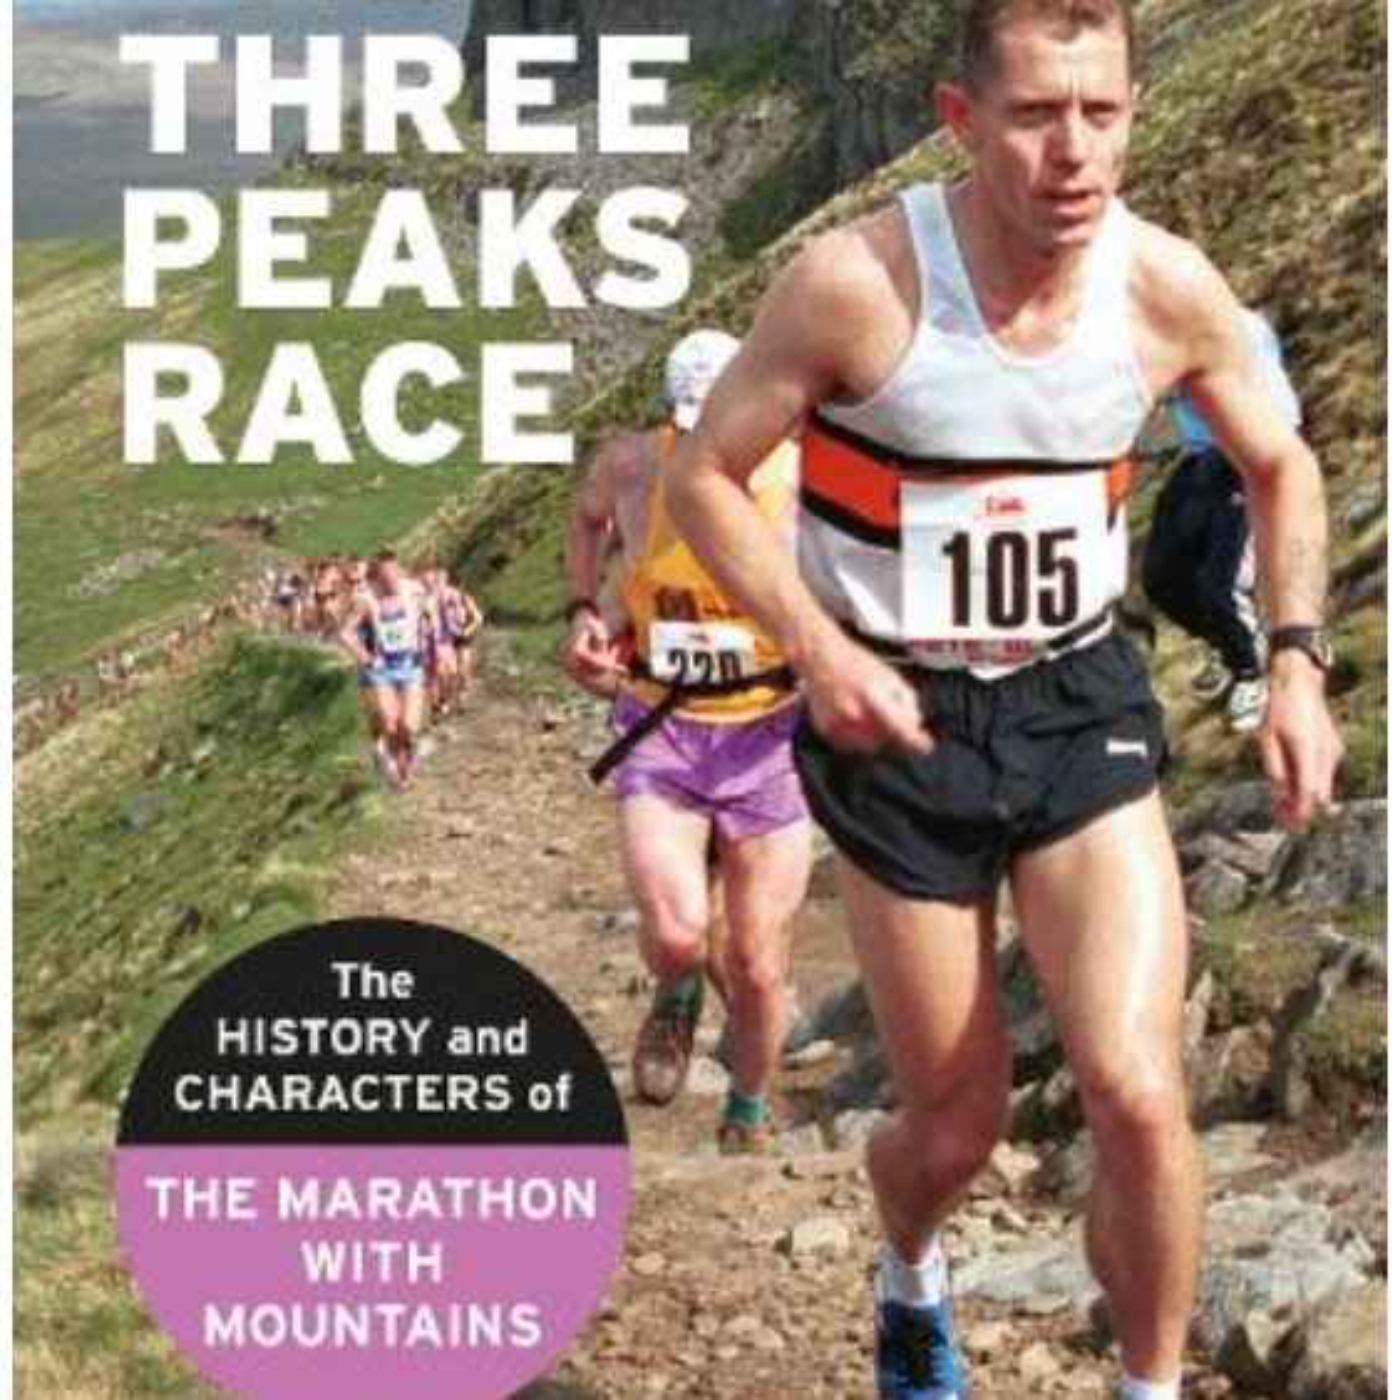 cover art for Steve Chilton's book - The Three Peaks Race: the history & characters of the marathon with mountains